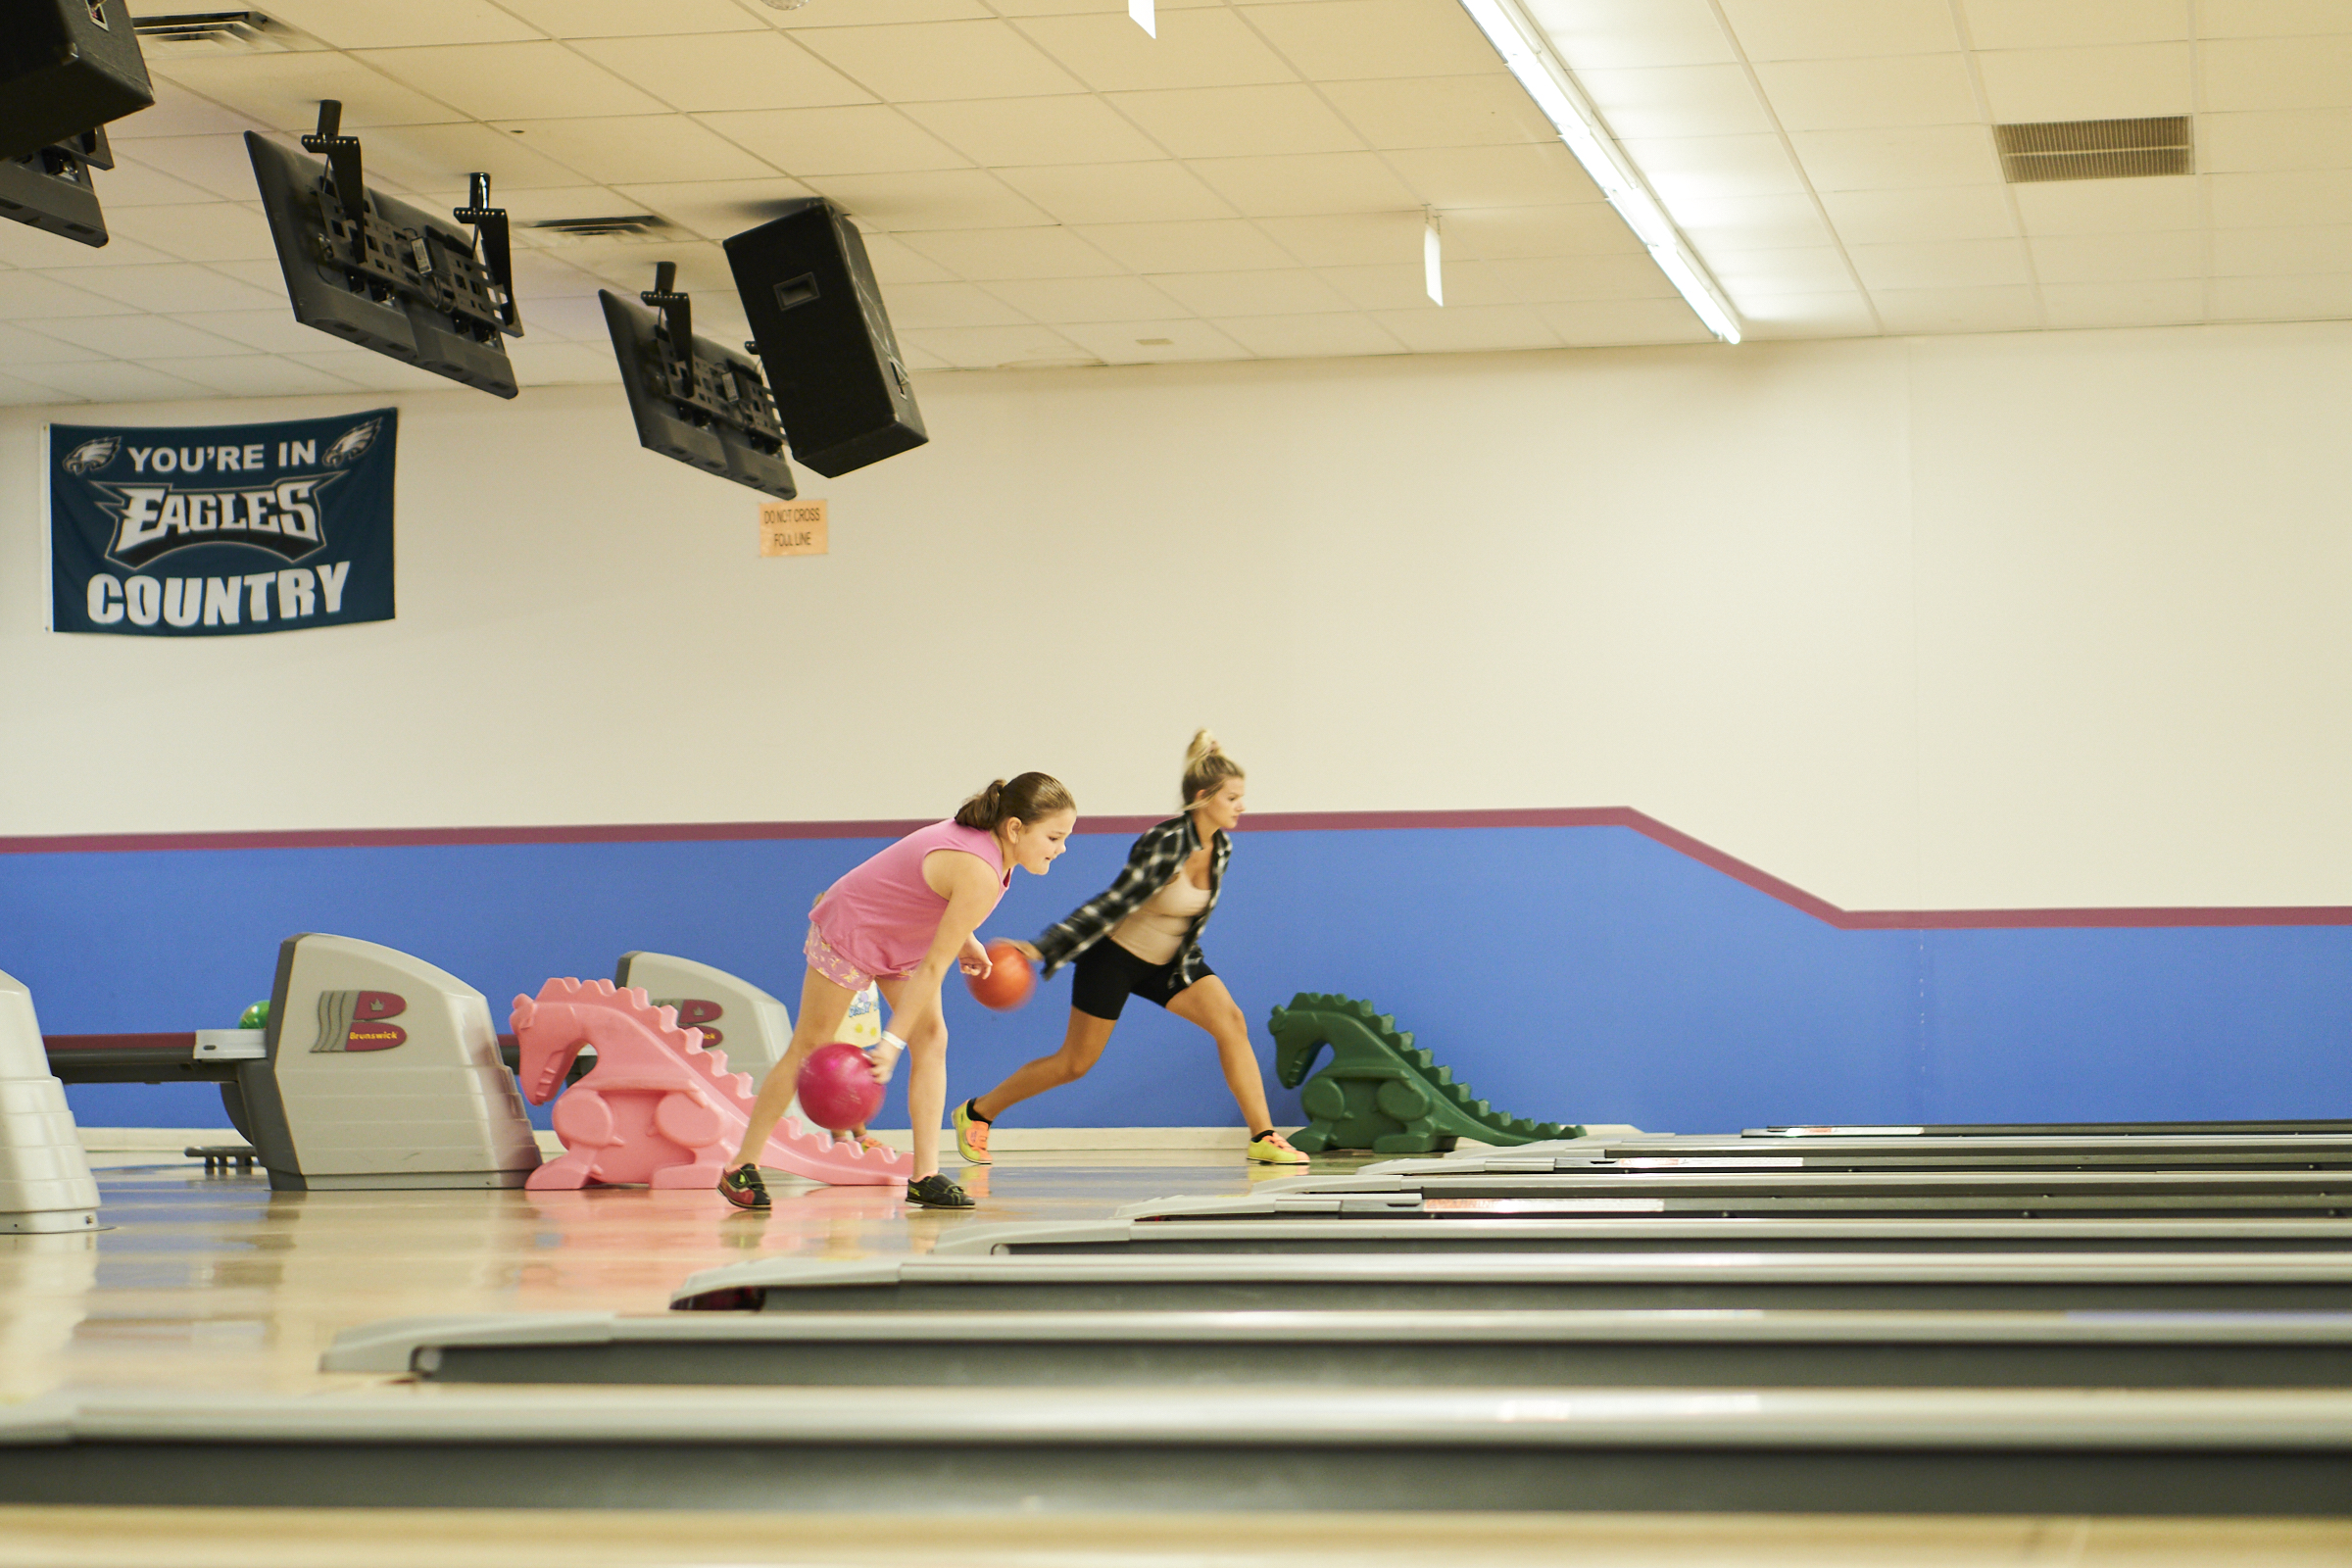 Strike Up the Fun: 10 Compelling Reasons to Host Your Kid’s Birthday Party at the Bowling Alley!